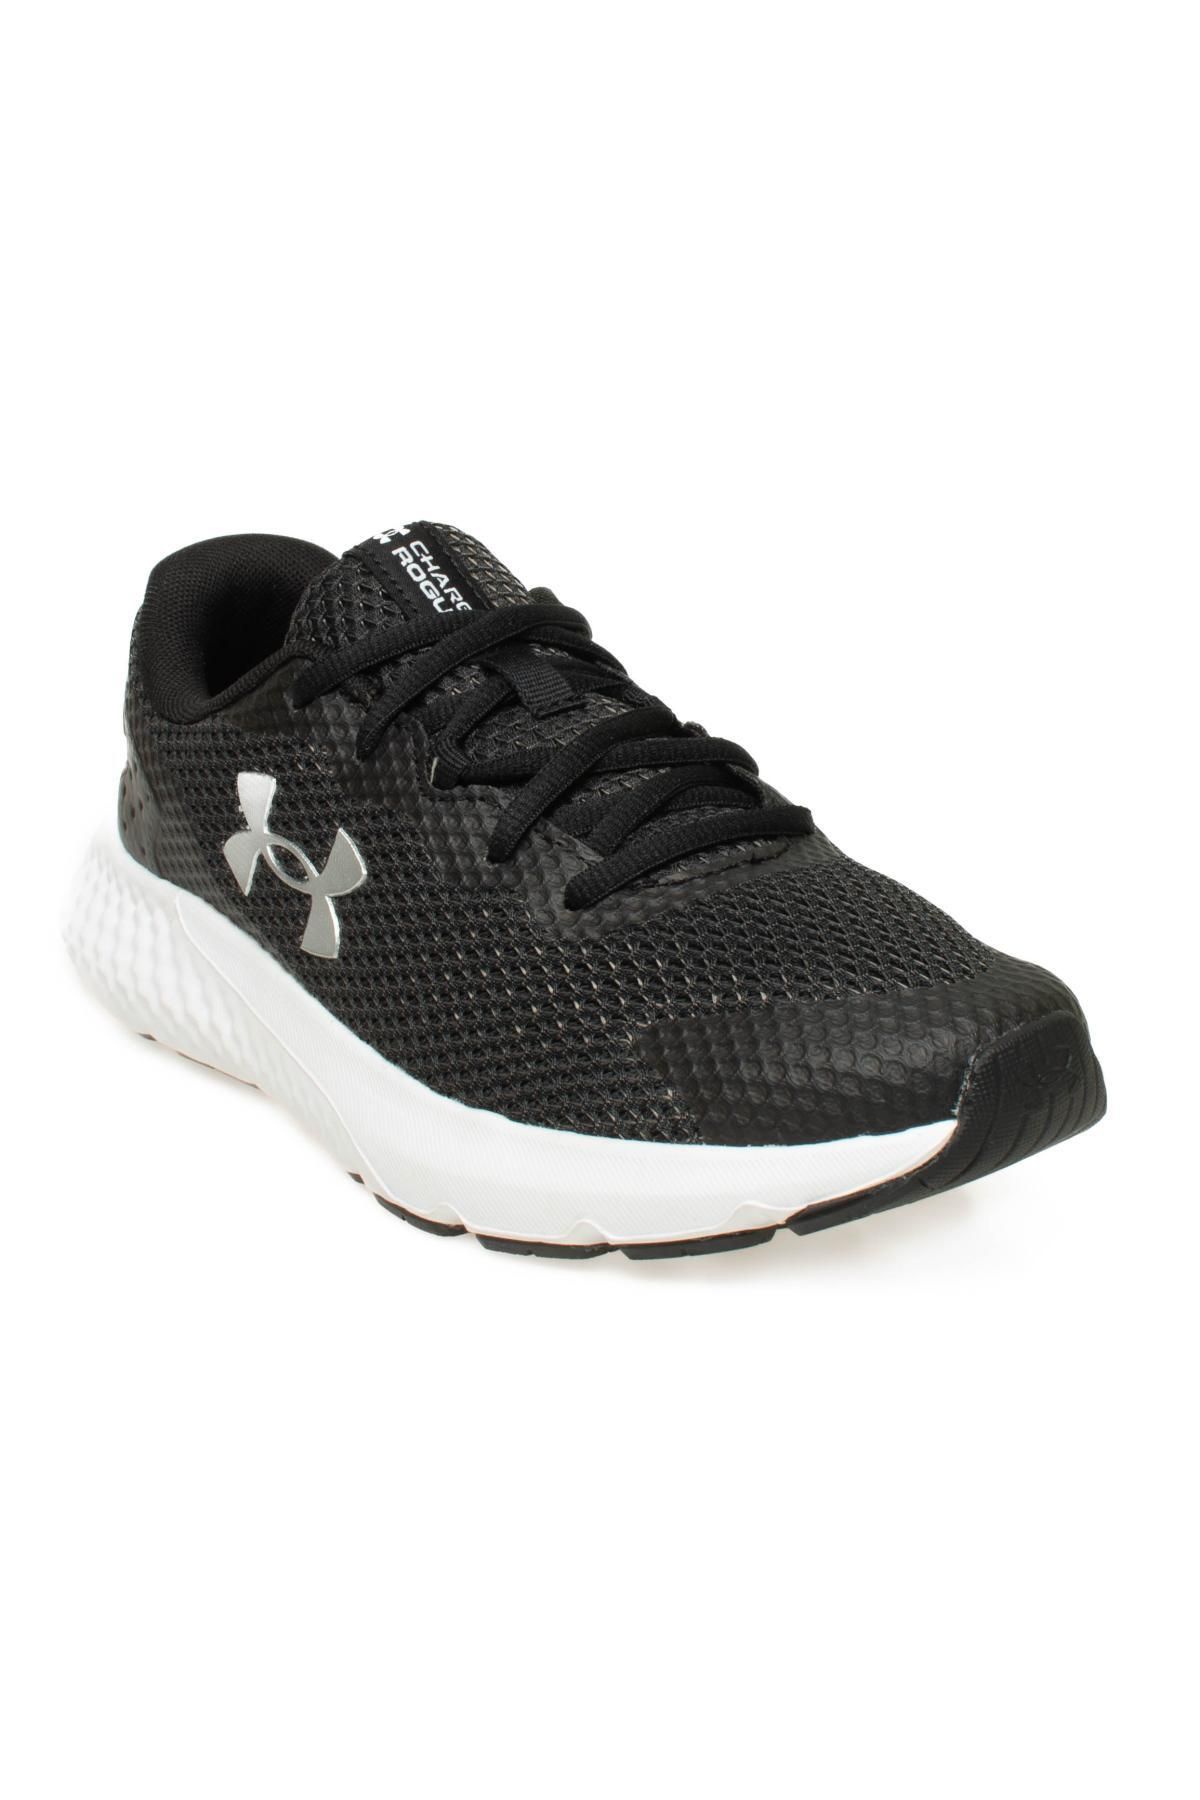 Under Armour 3024888Z Ua W Charged Rogue 3 Black Women's Sports